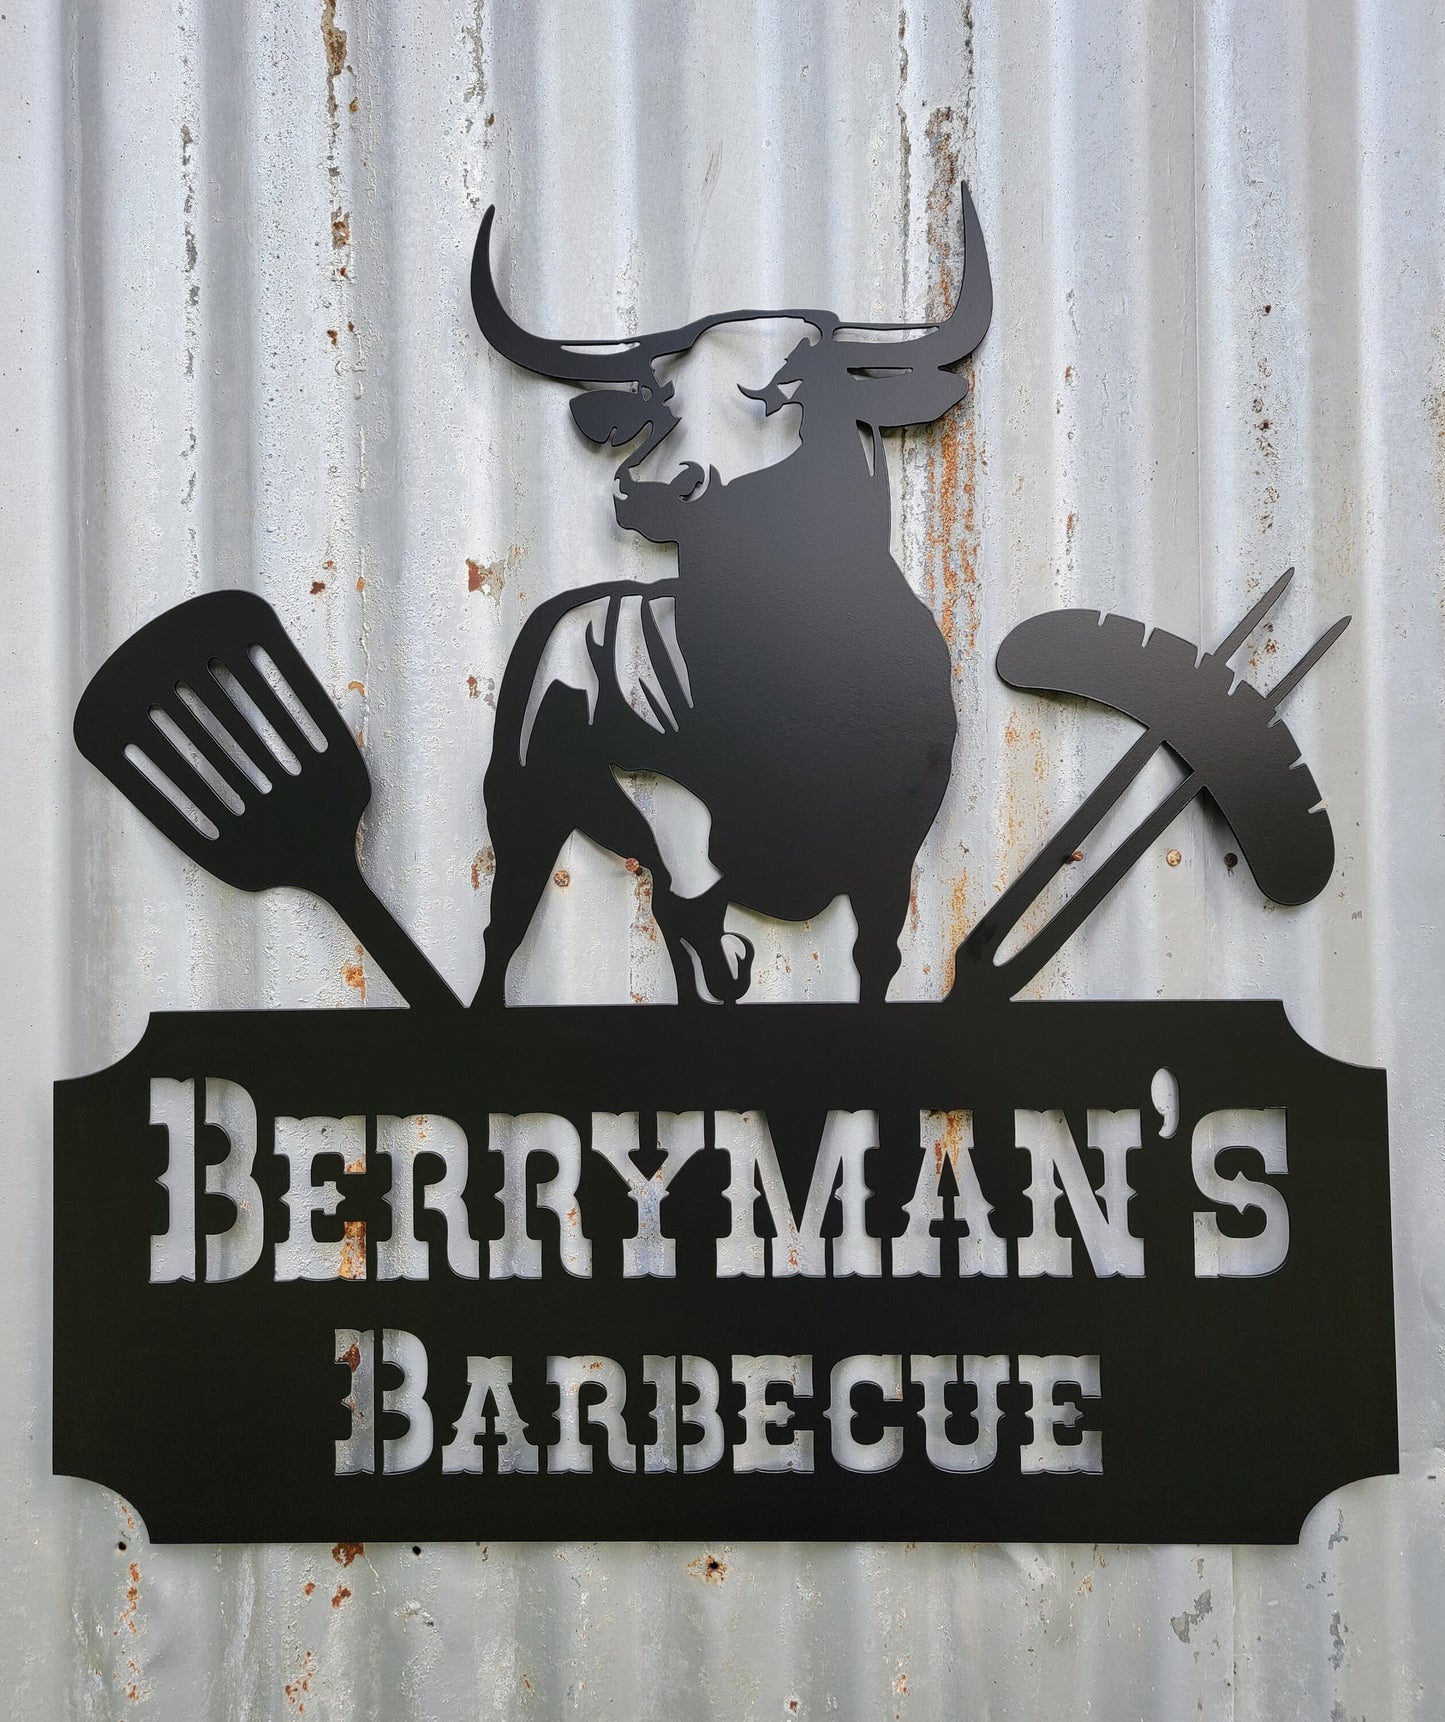 Personalized Grill Sign; Metal Grilling Sign; Dad's Grill Sign; Metal BBQ Smoker and Grill Sign; Grilling Gift; Grandpa; Papa; Father's Day